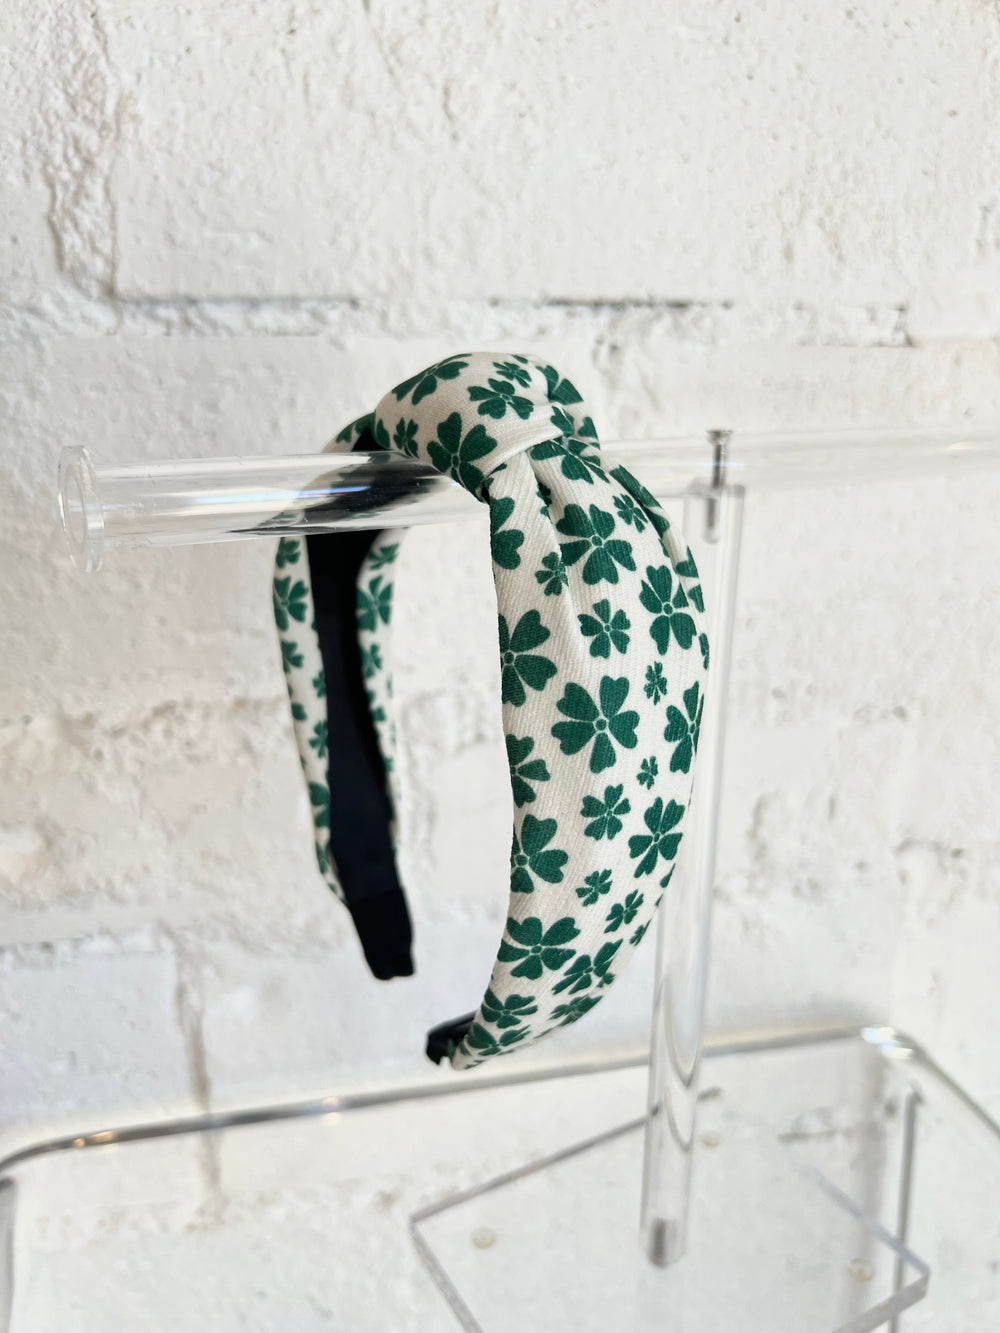 St Pattys Headband, Hair Ties, Adeline, Adeline, dallas boutique, dallas texas, texas boutique, women's boutique dallas, adeline boutique, dallas boutique, trendy boutique, affordable boutique